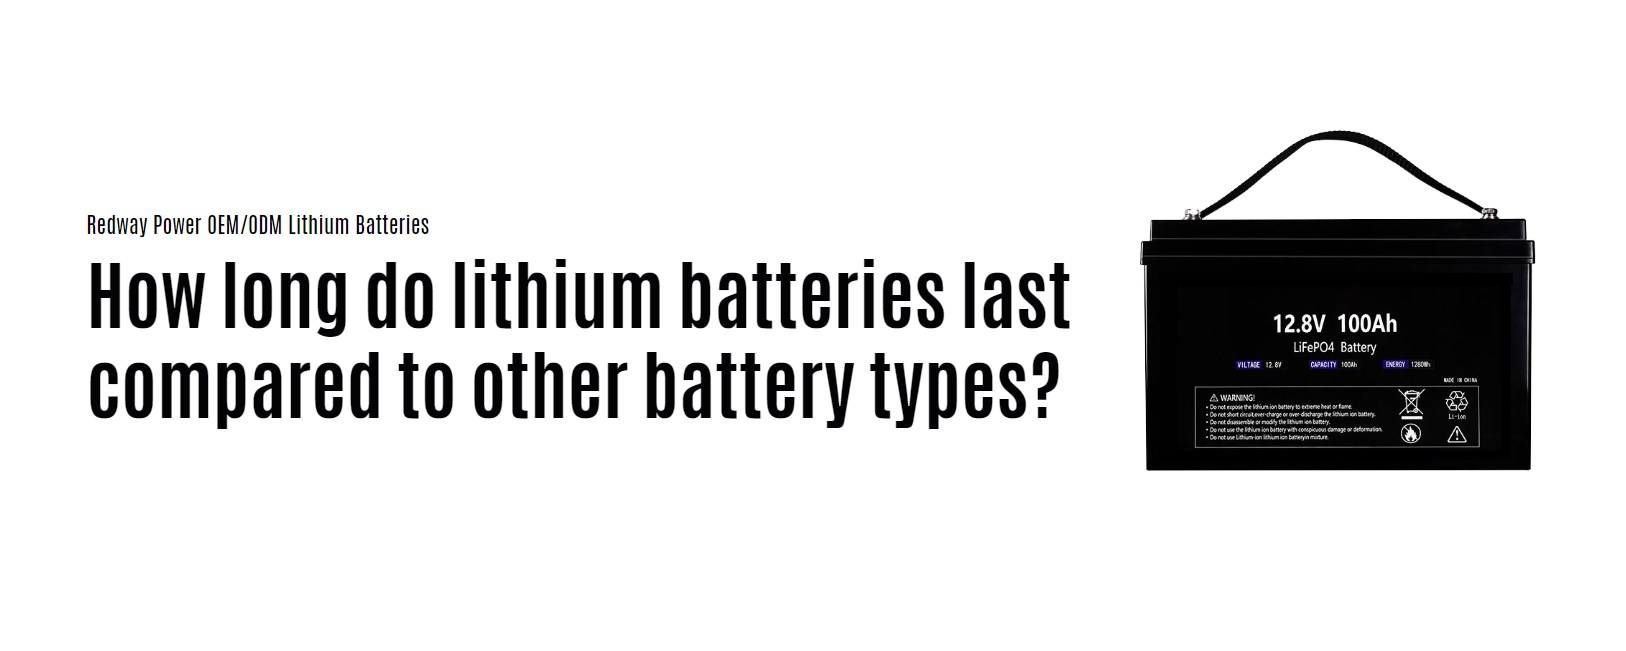 How long do lithium batteries last compared to other battery types?